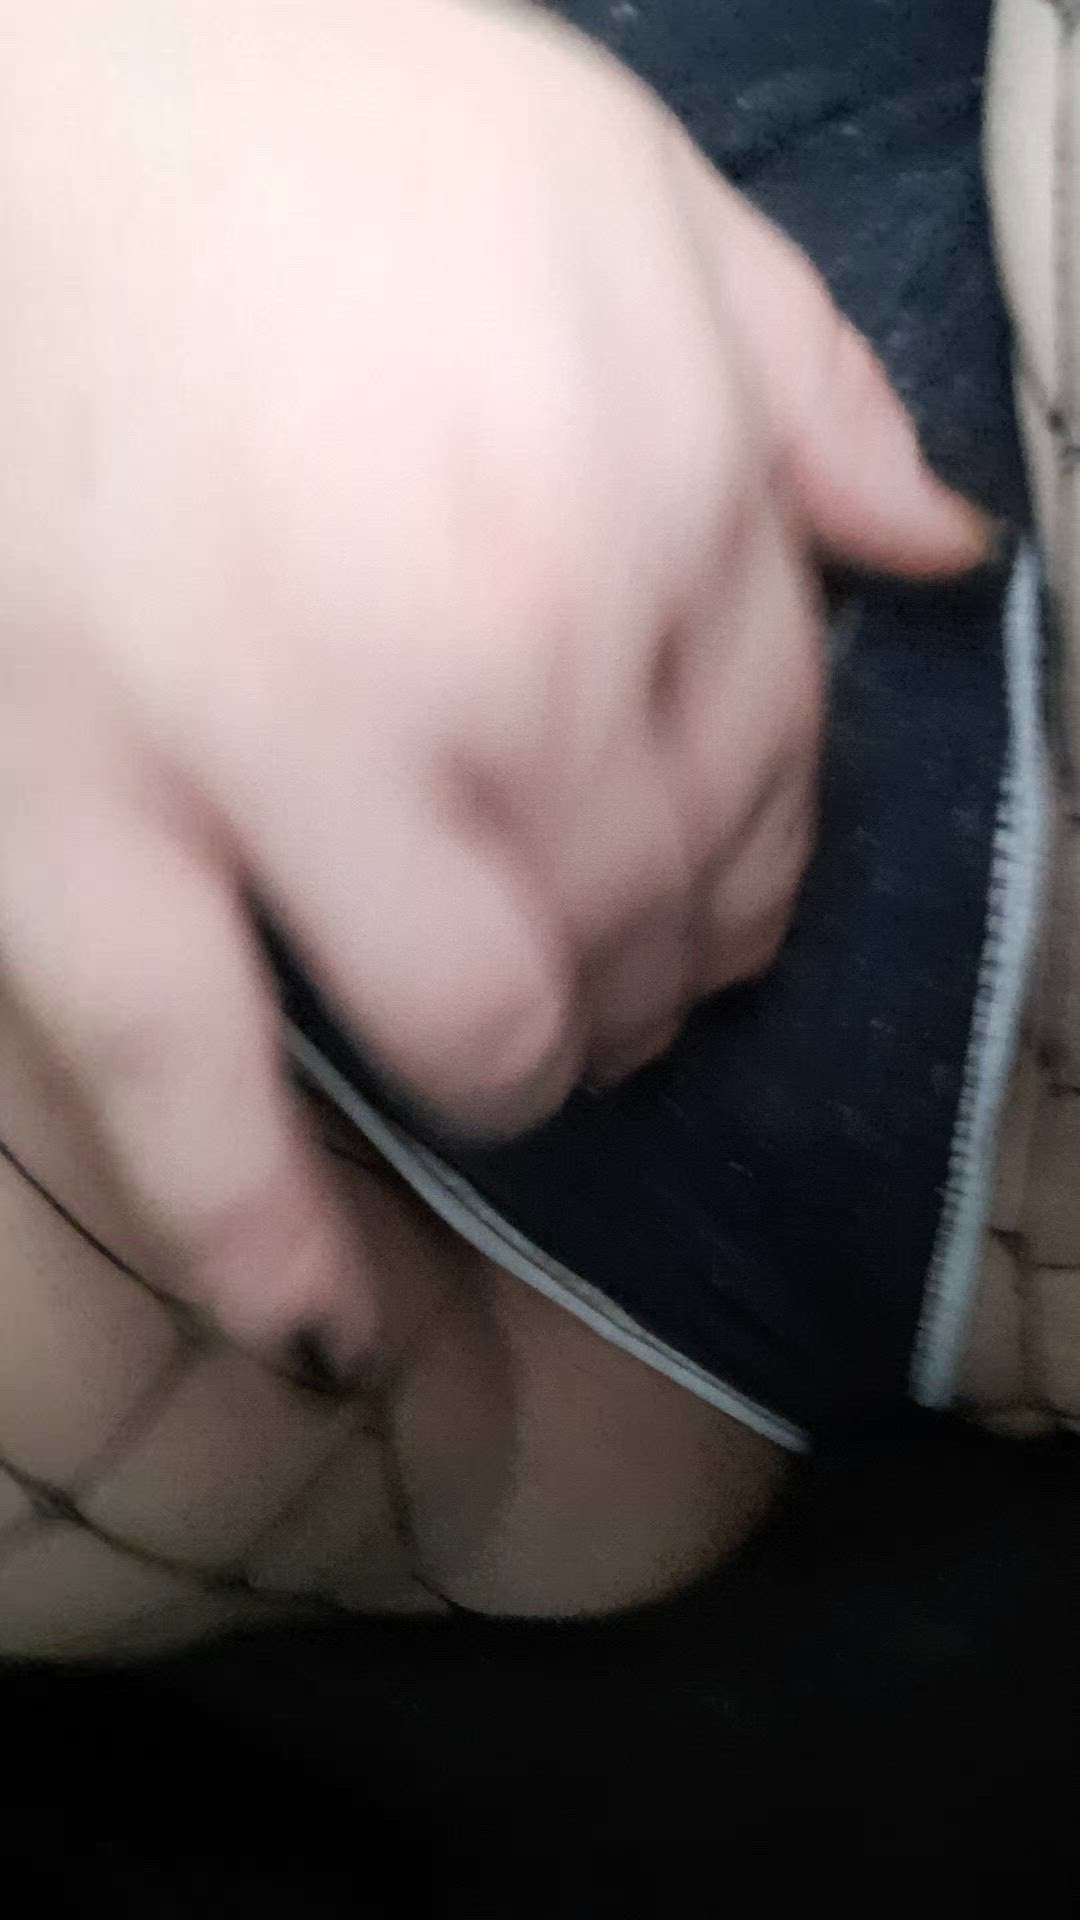 Solo porn video with onlyfans model astralmoon- <strong>@queermoon69</strong>